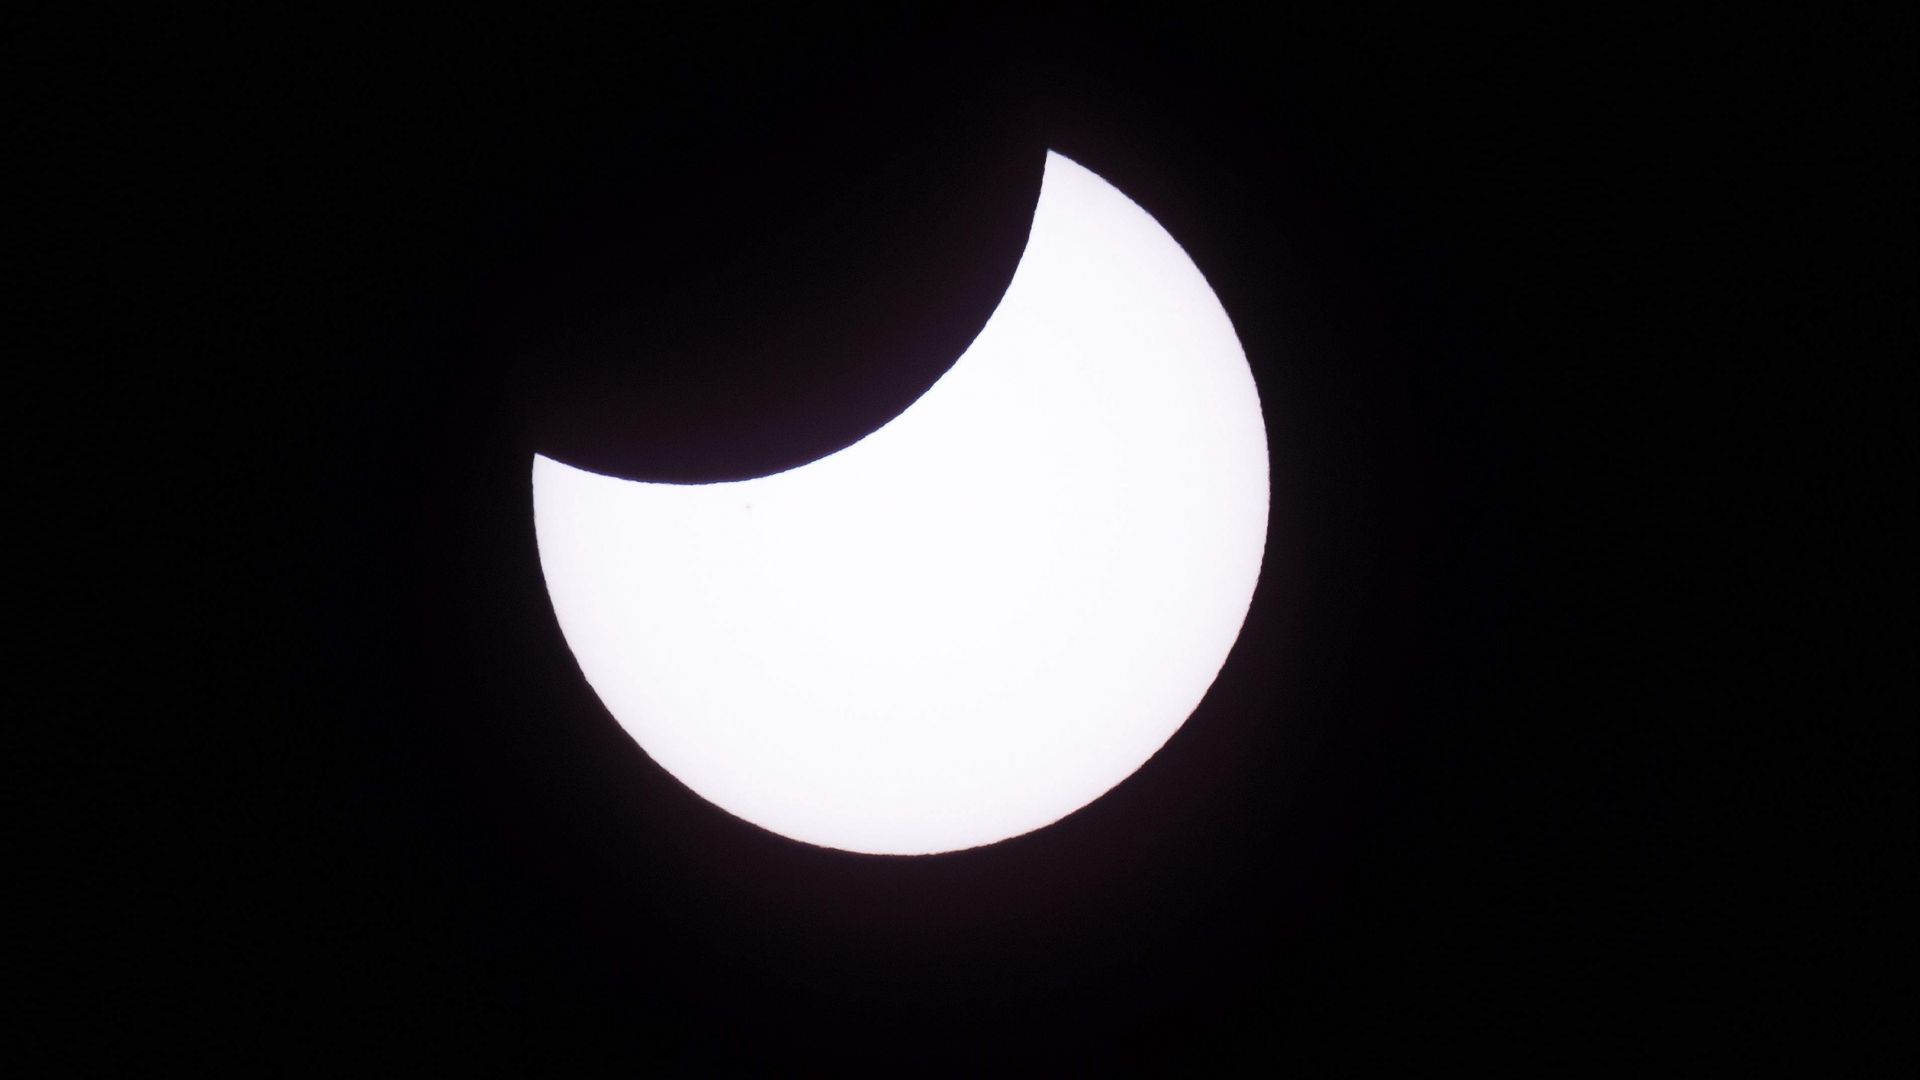 Total solar eclipse of Aug 21 2017, Great American eclipse, 4k (horizontal)